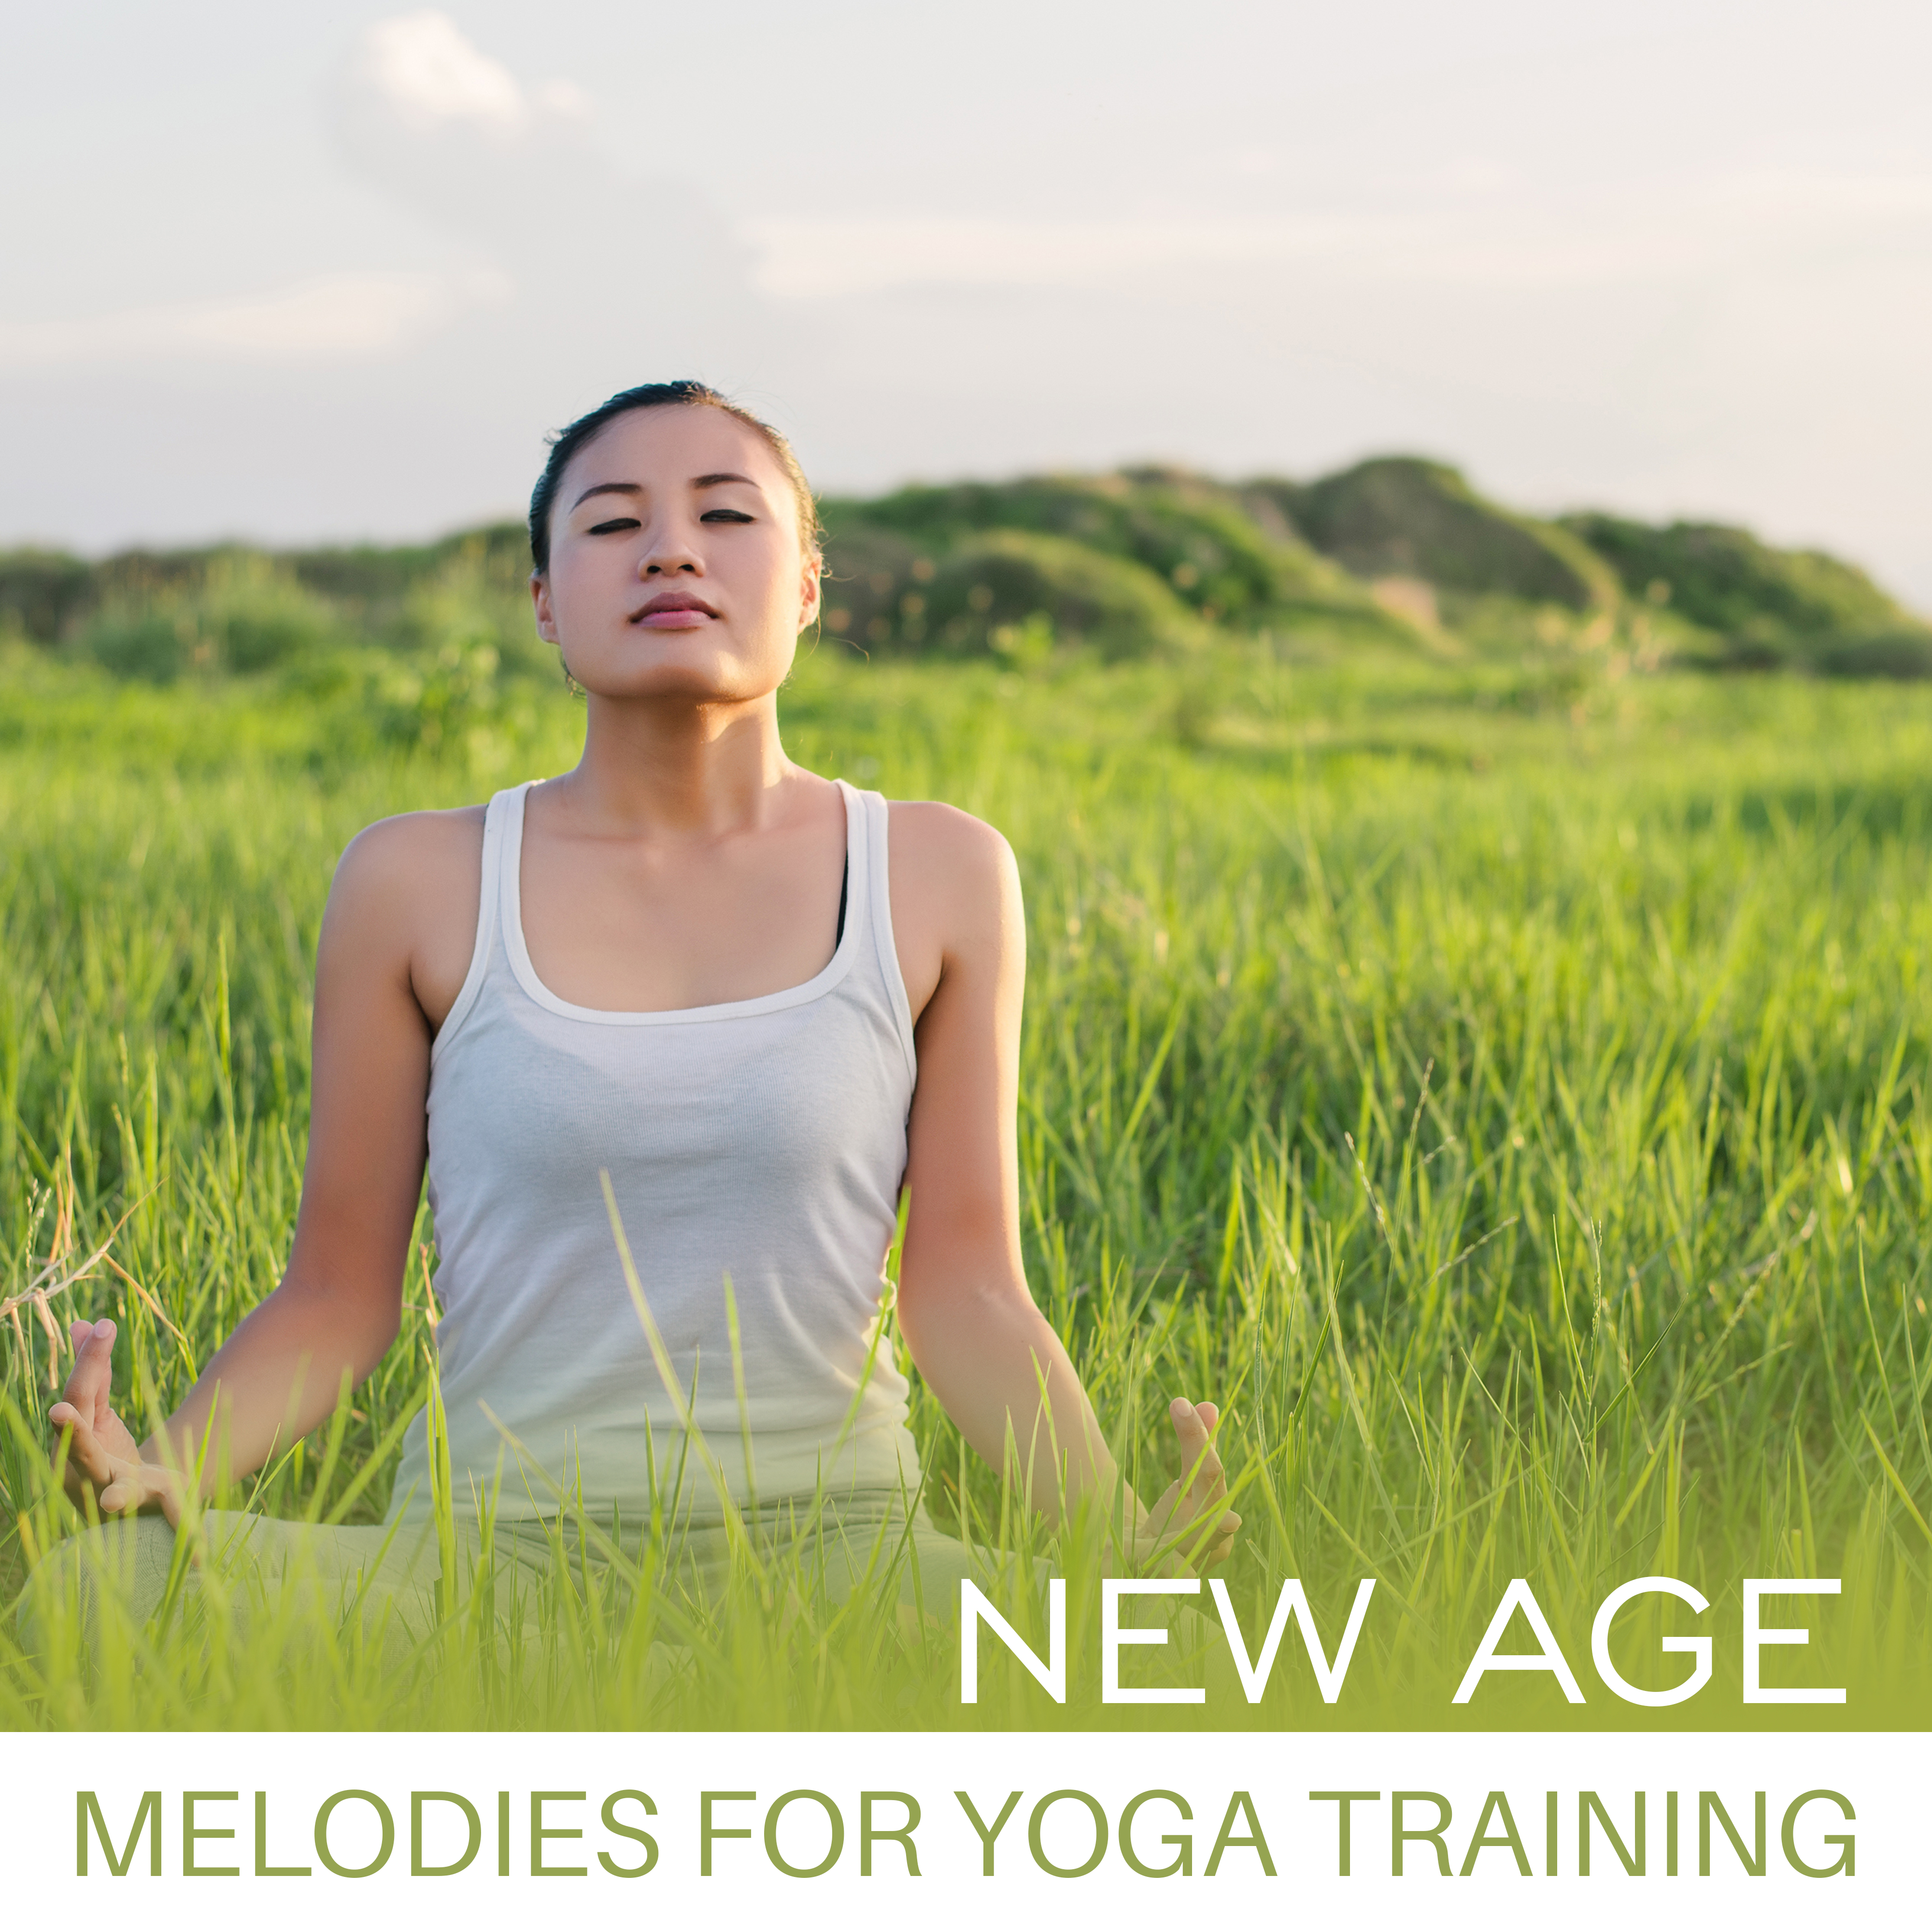 New Age Melodies for Yoga Training